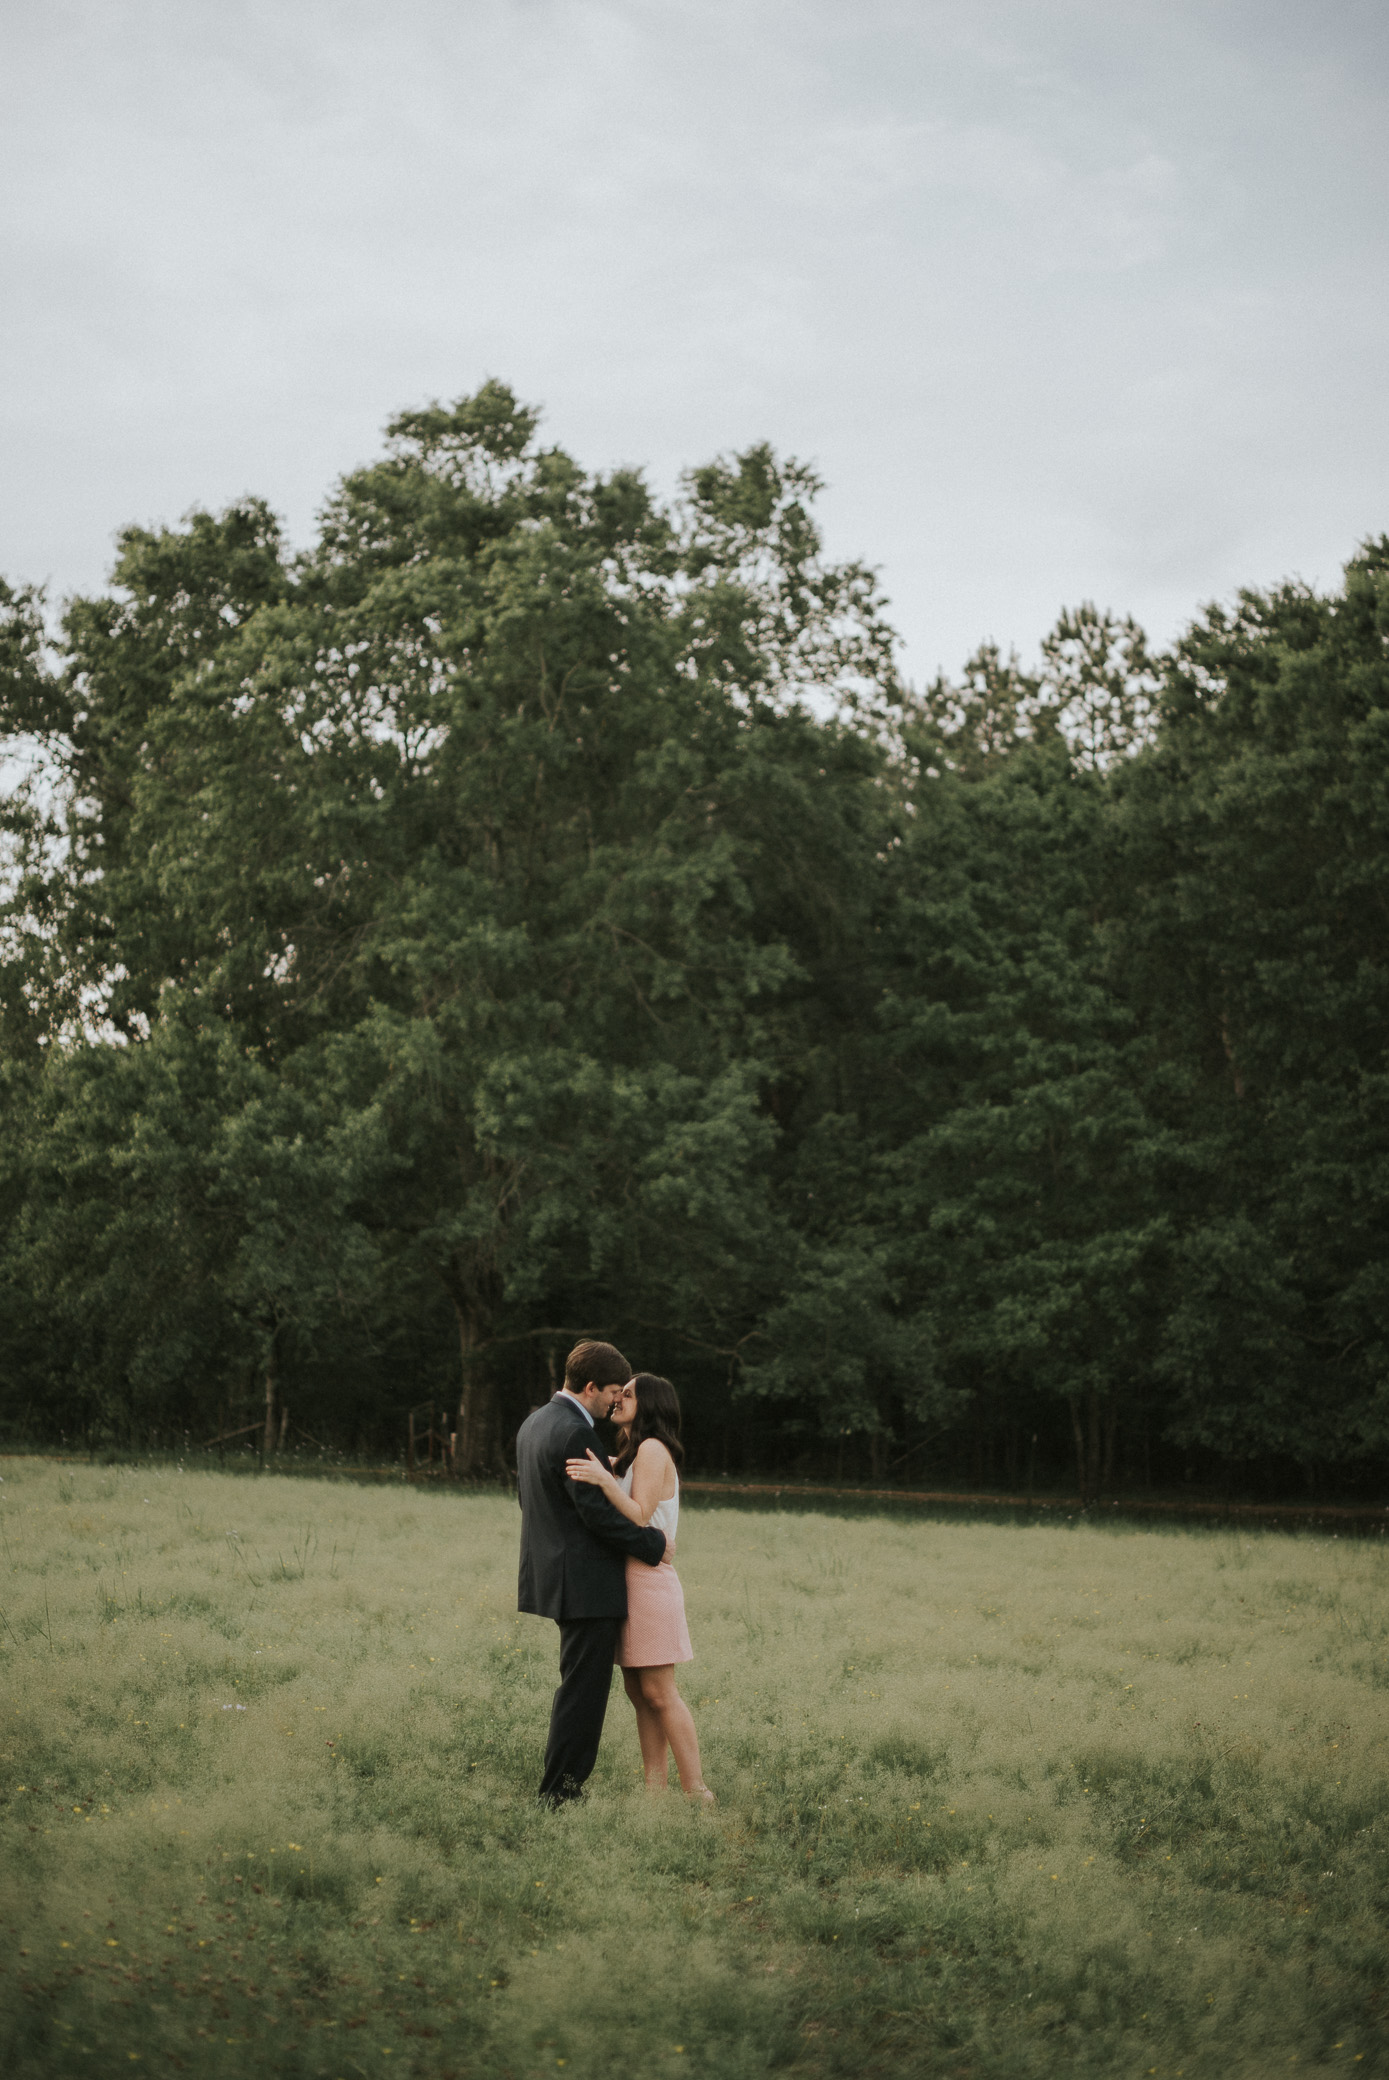 Romantic Engagement Photography in Jackson Mississippi